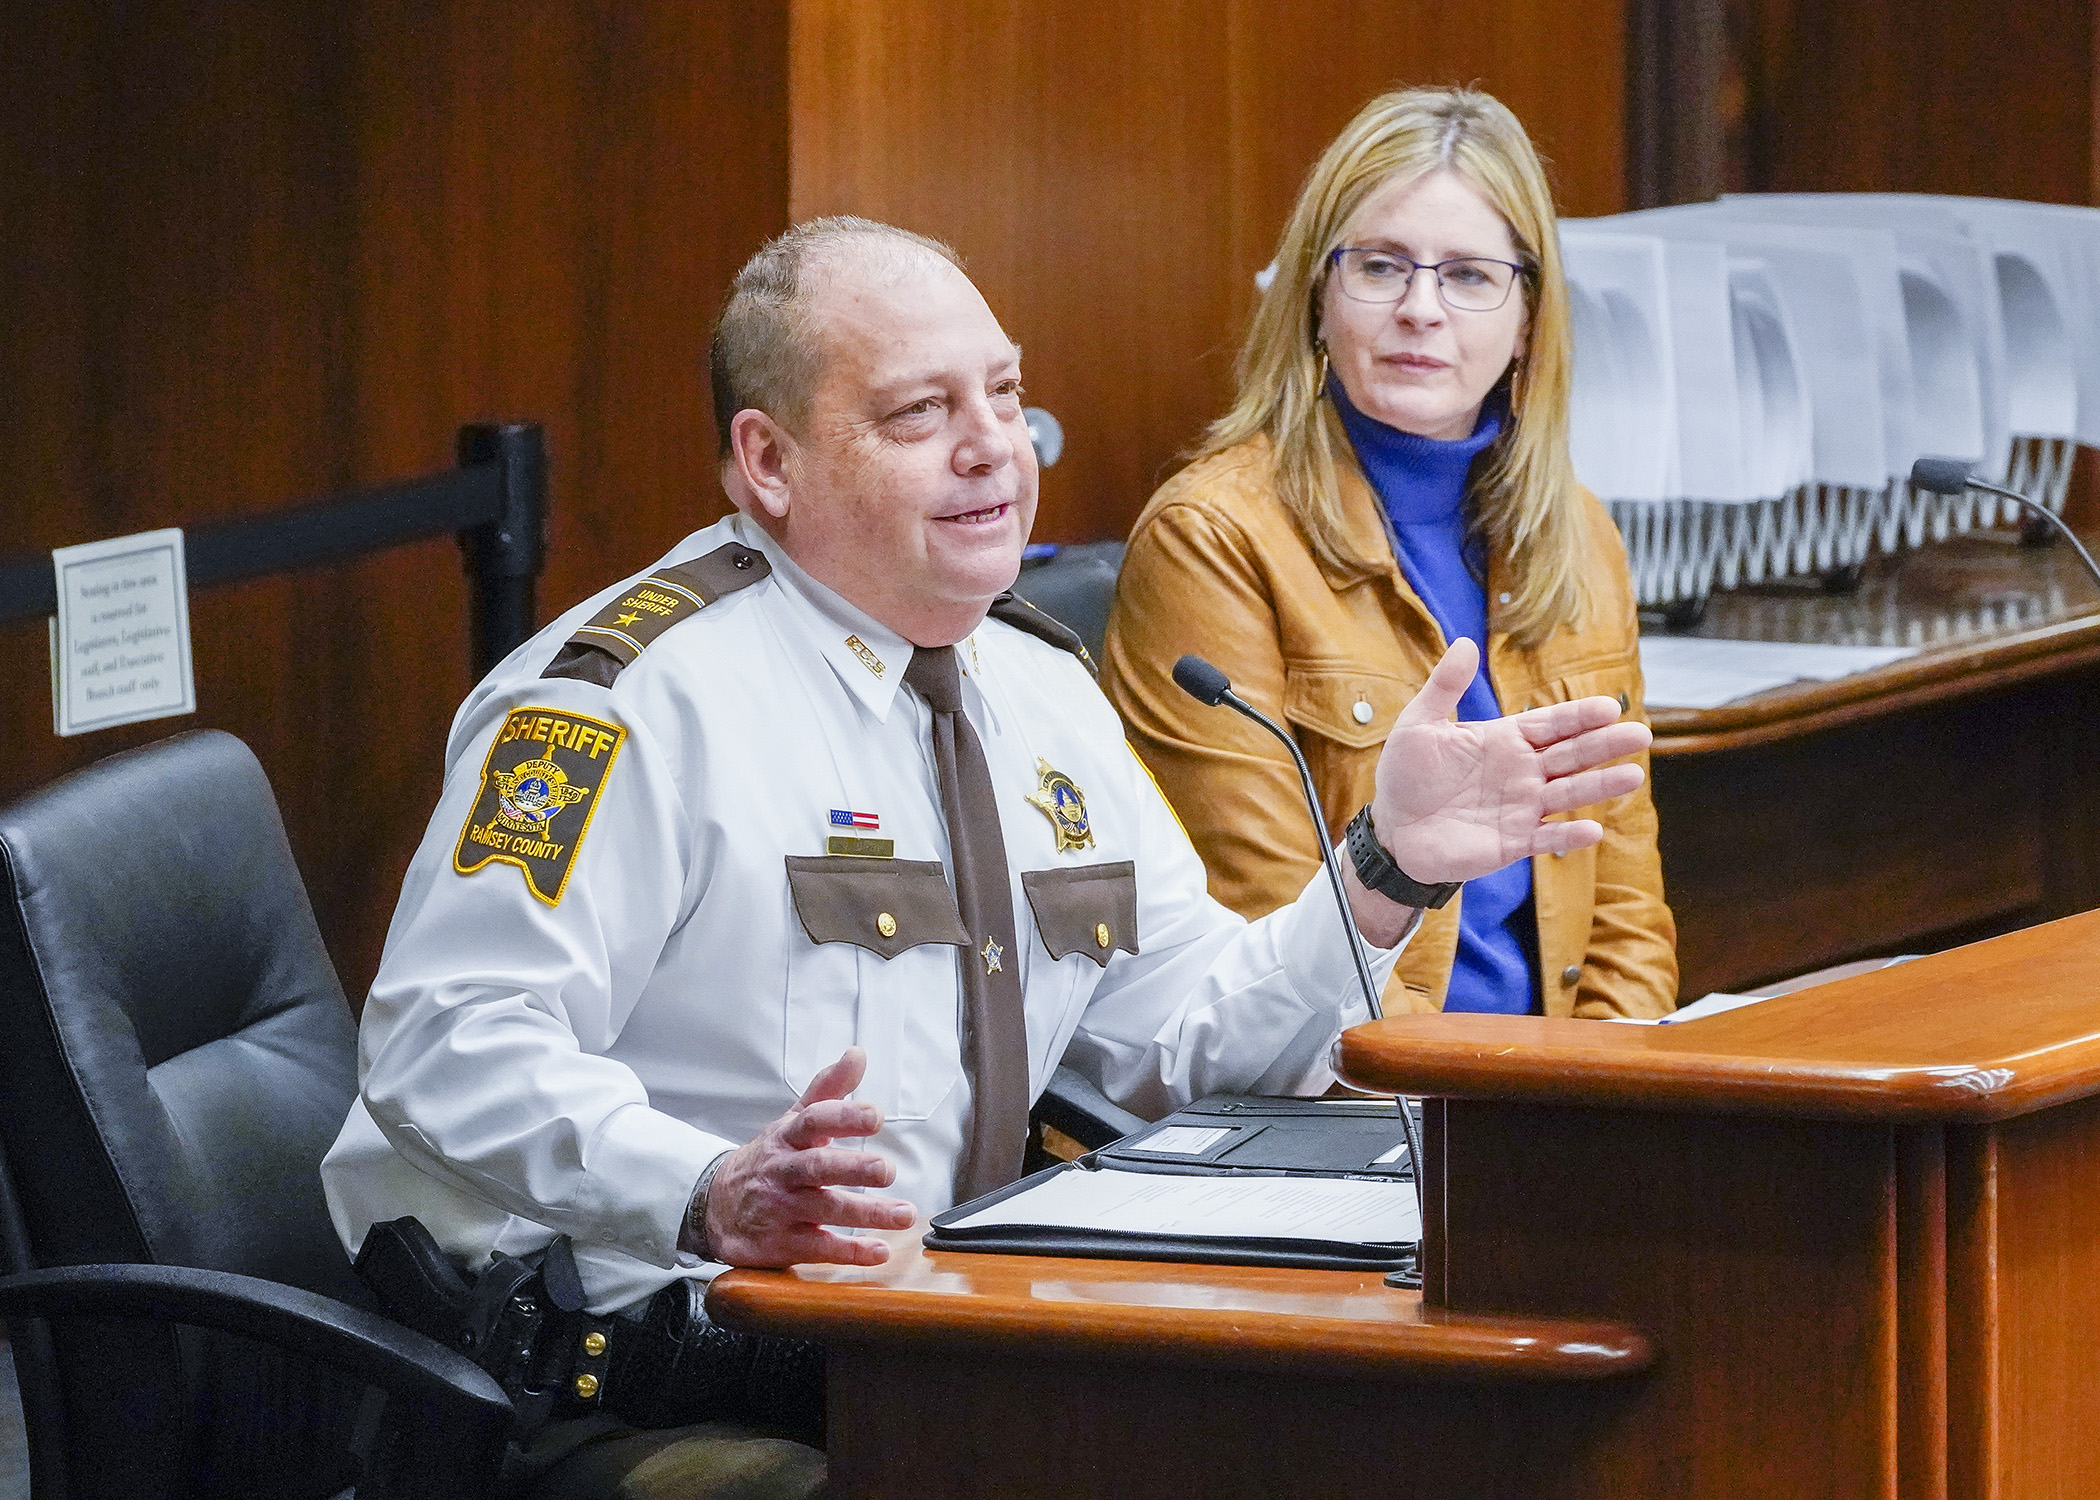 Ramsey County Undersheriff Mike Martin testifies Feb. 2 in support of a bill sponsored by Rep. Kelly Moller, right, that would authorize the expanded use of tracking devices during stolen vehicle investigations. (Photo by Andrew VonBank)